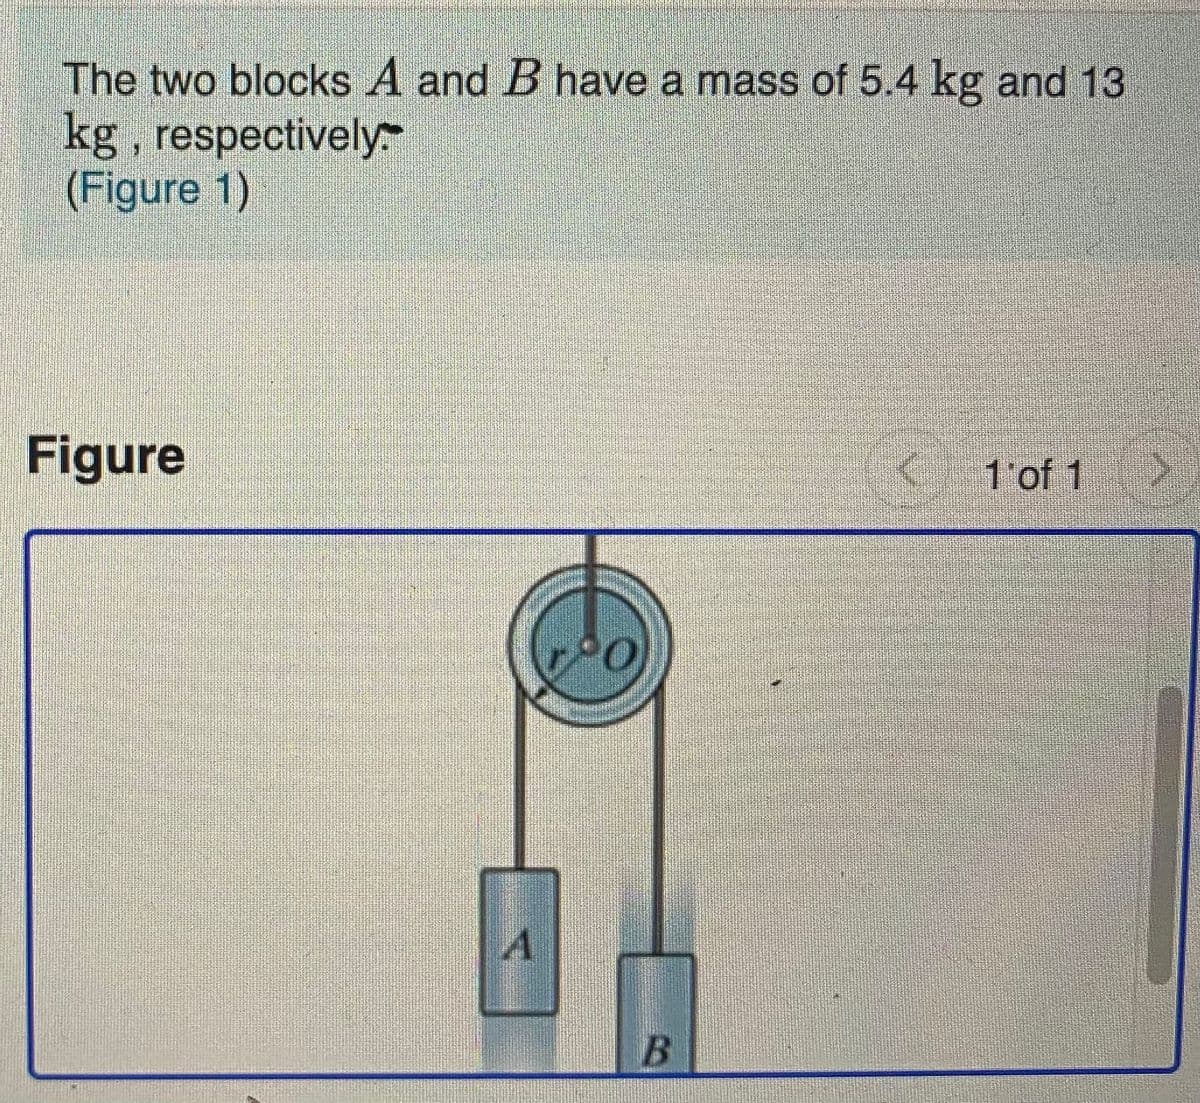 The two blocks A and B have a mass of 5.4 kg and 13
kg , respectively-
(Figure 1)
Figure
1'of 1
